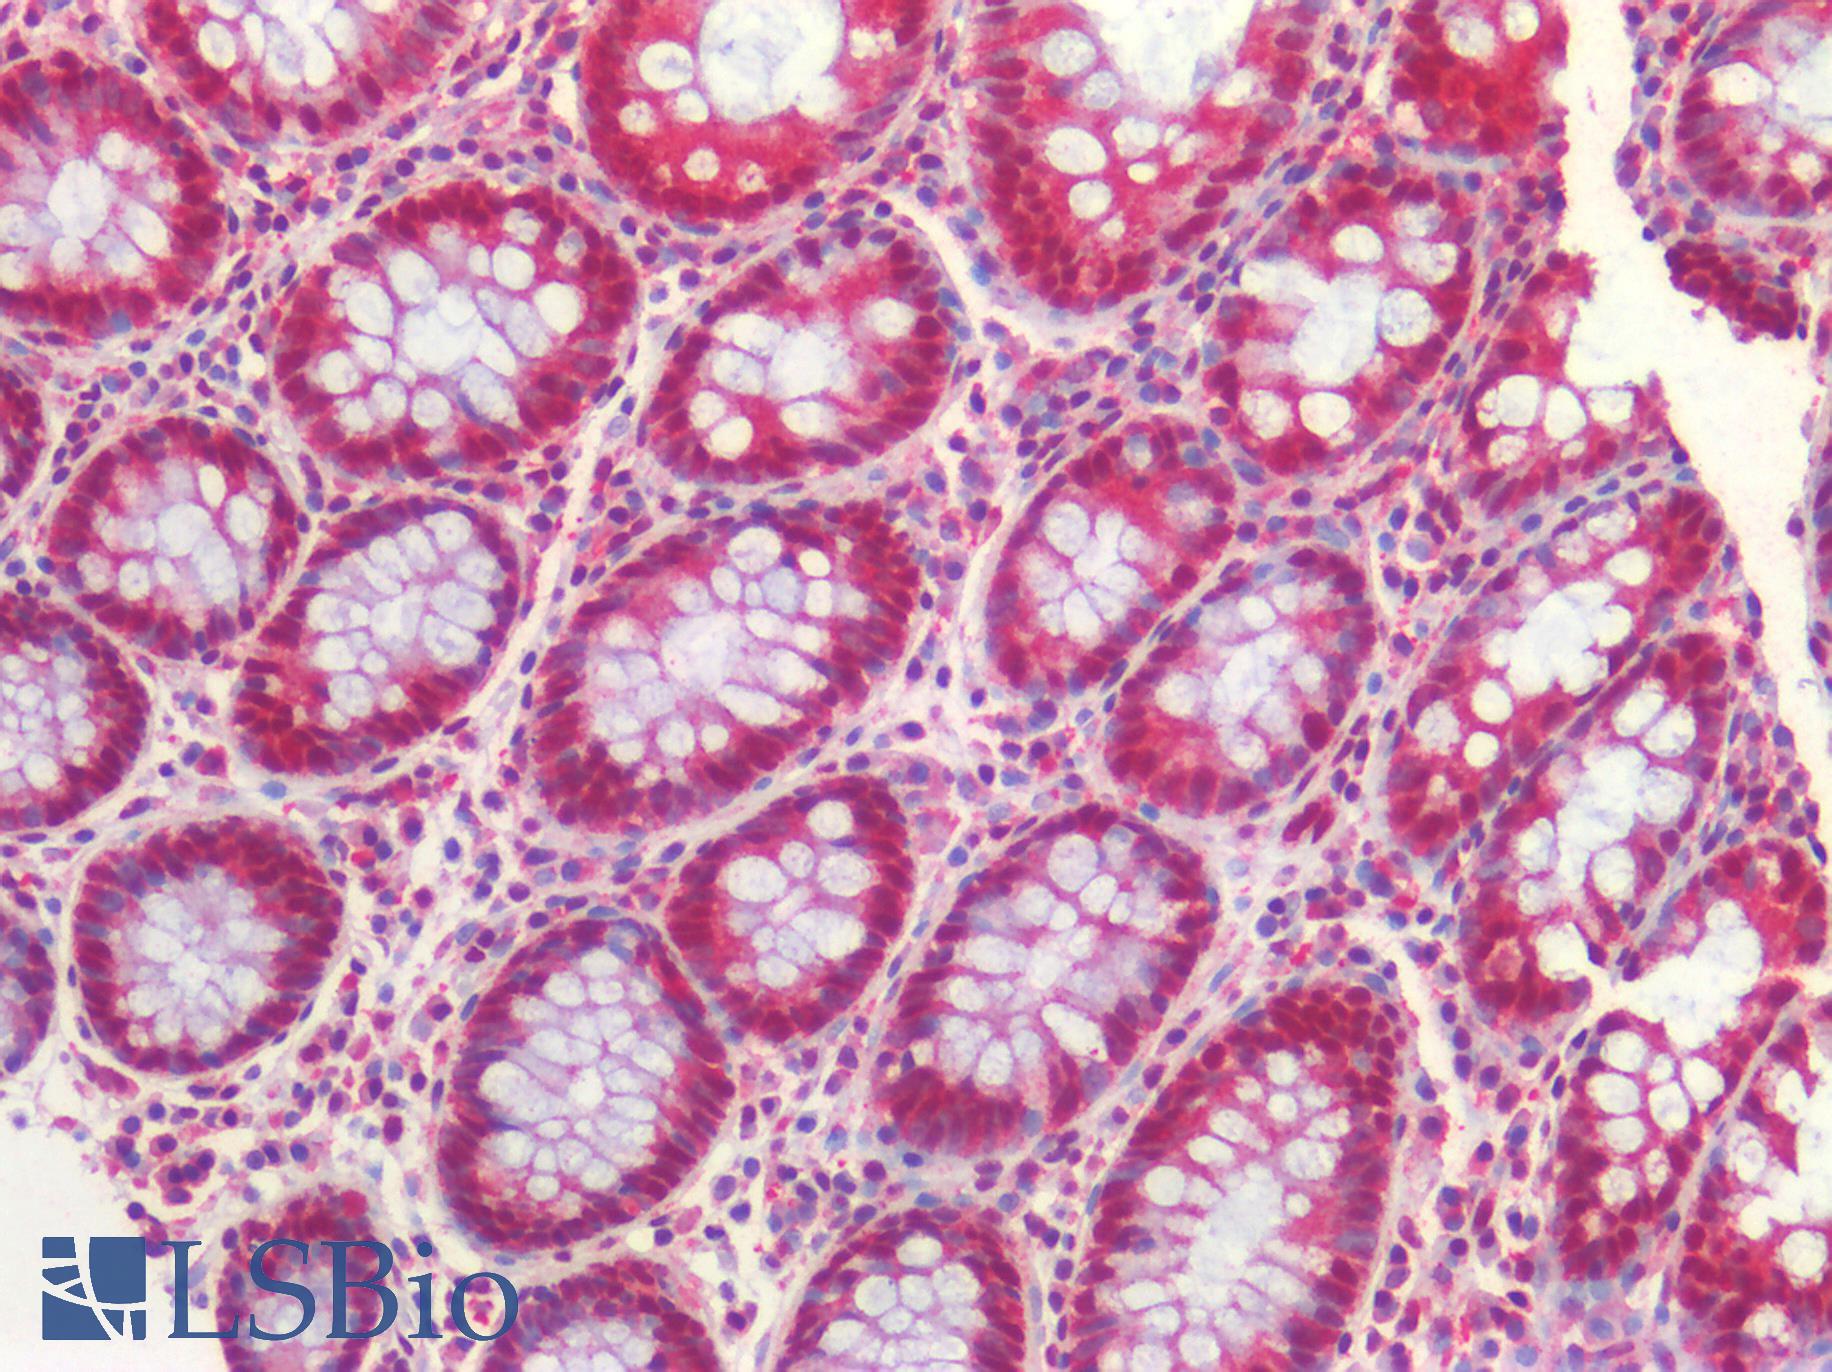 FOXP1 Antibody - Human Colon: Formalin-Fixed, Paraffin-Embedded (FFPE)